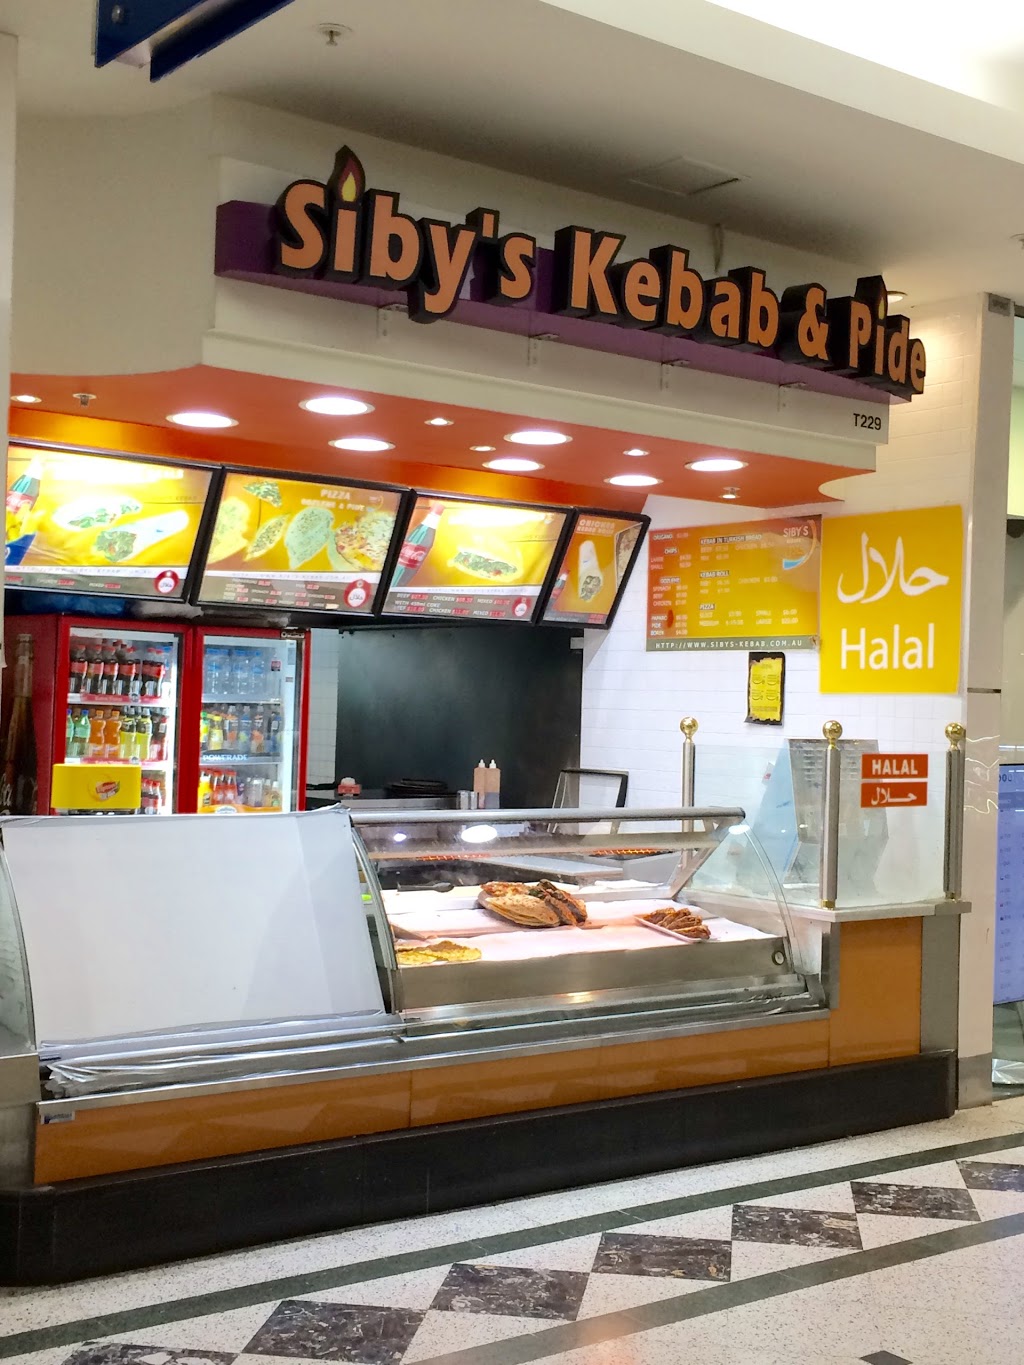 Sibys Kebabs and Pide | Stacey St, Bankstown NSW 2200, Australia | Phone: 0420 837 913